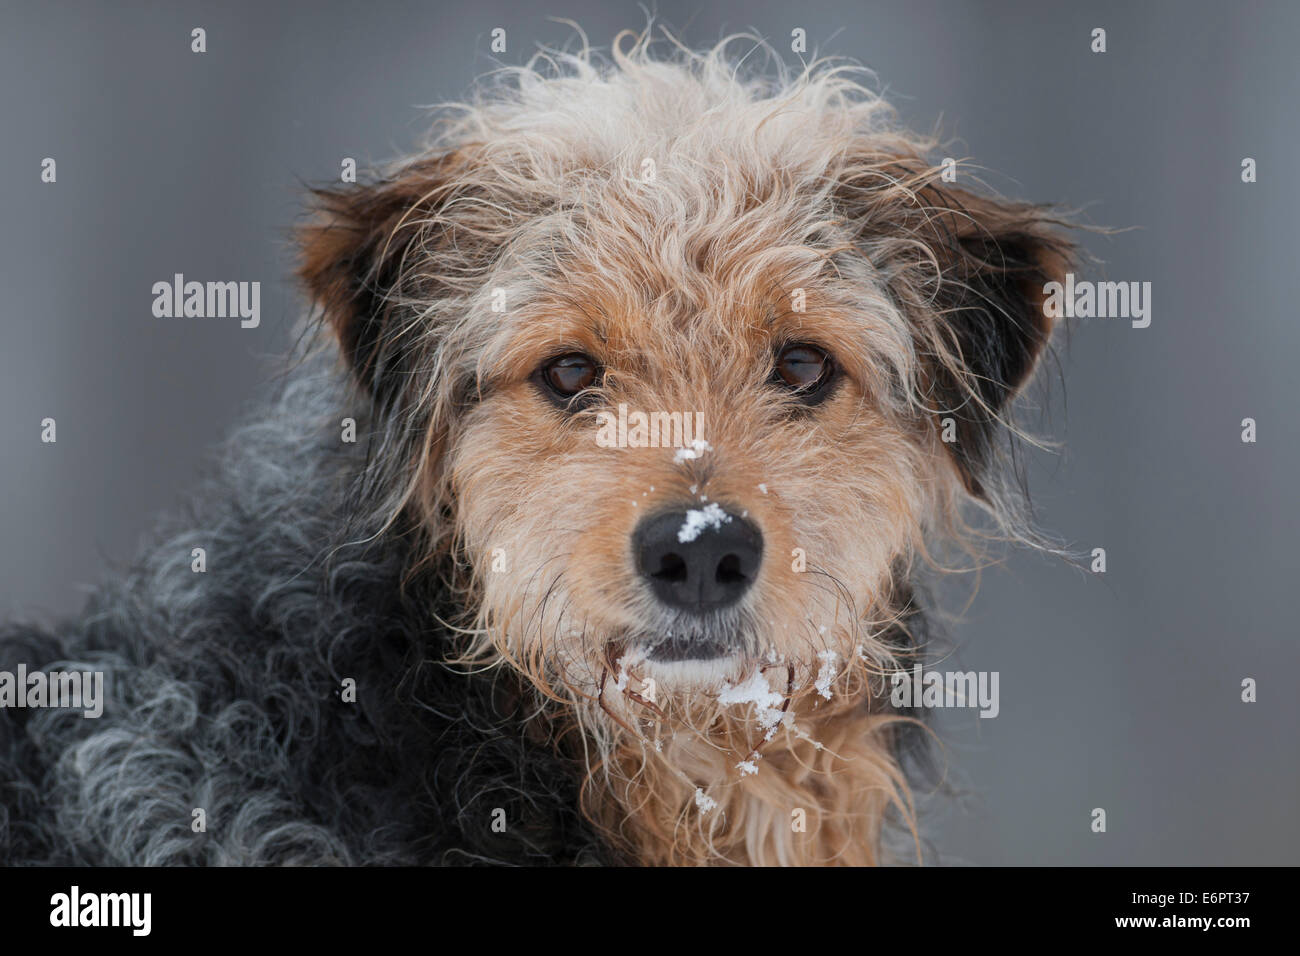 Bosnian Coarse-haired Hound, mongrel, portrait with snow Stock Photo